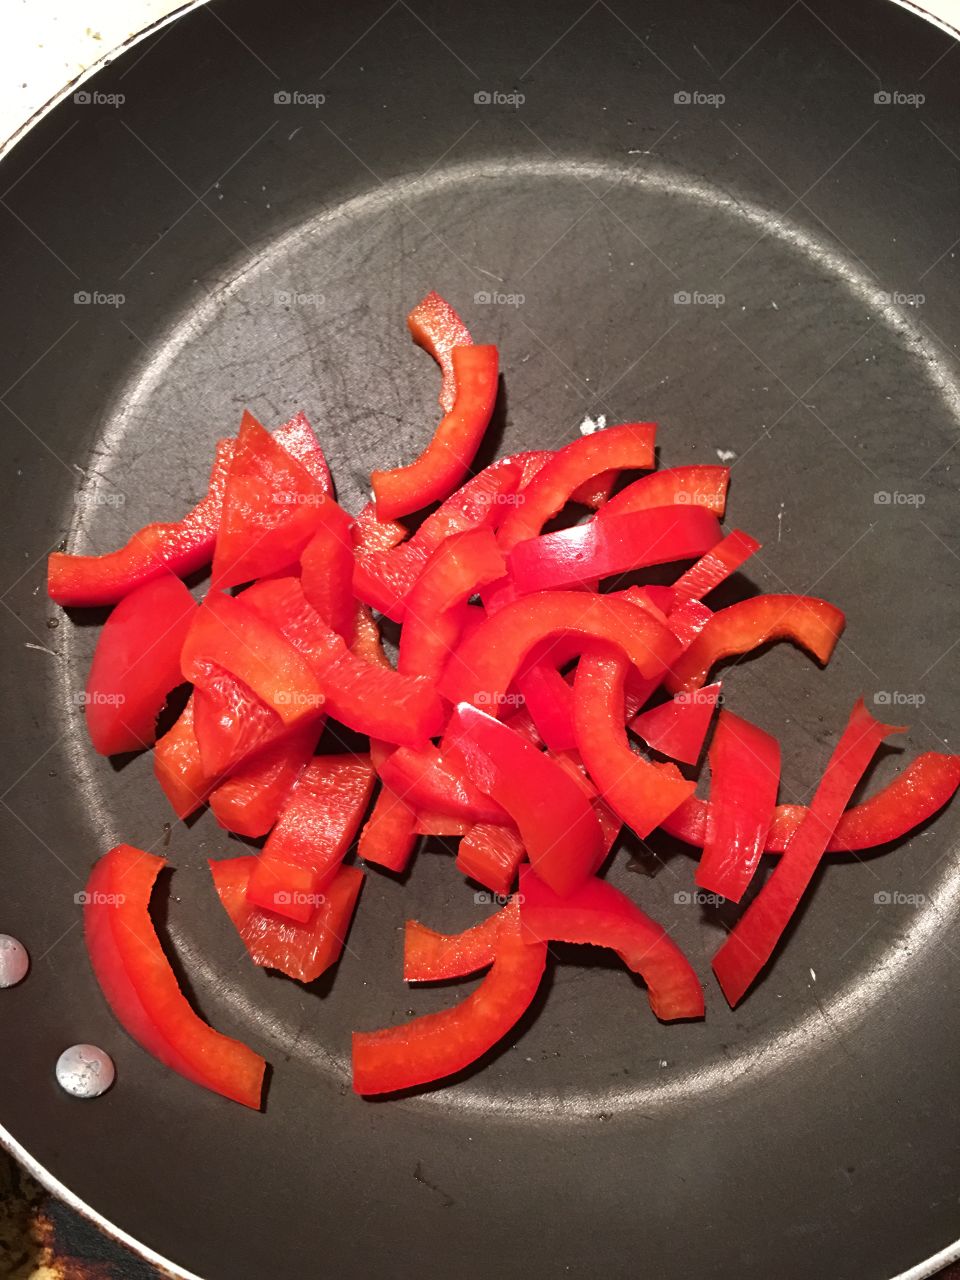 Cooking peppers.